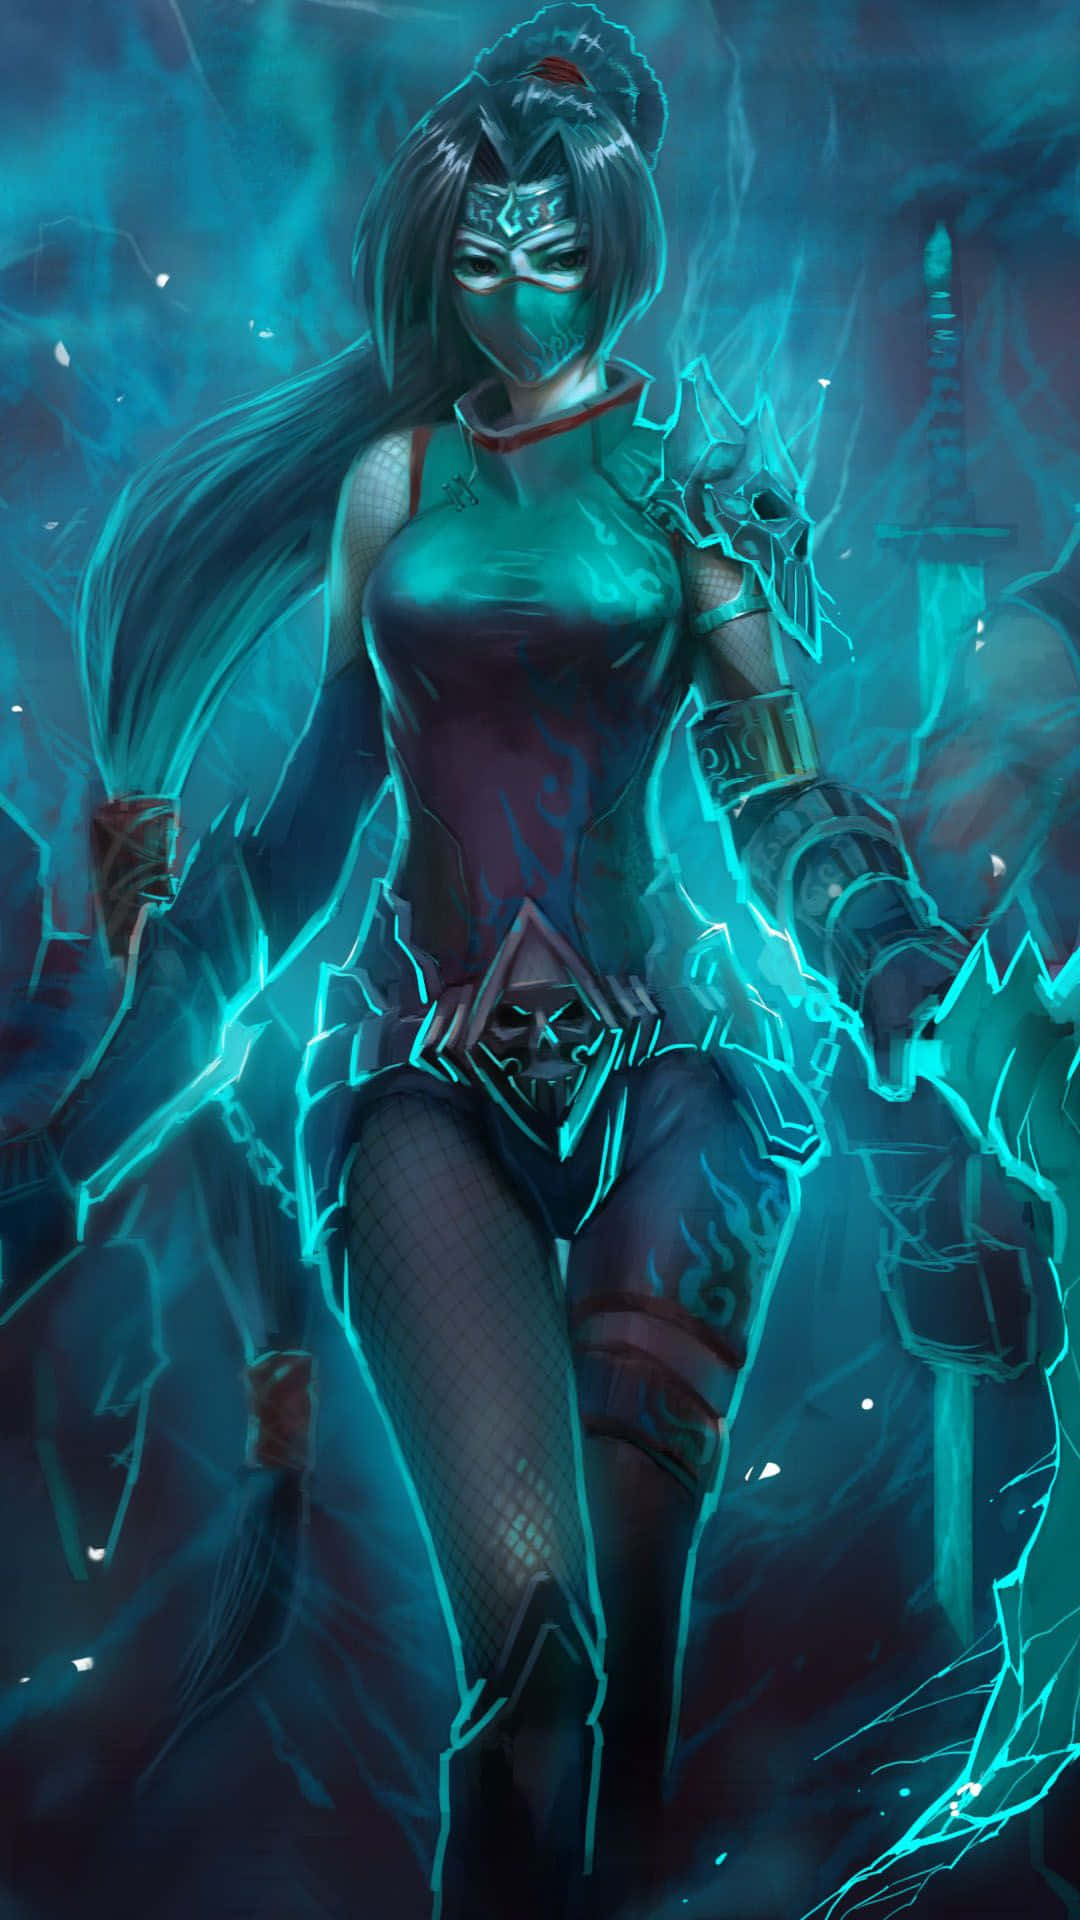 100+] League Of Legends Phone Wallpapers